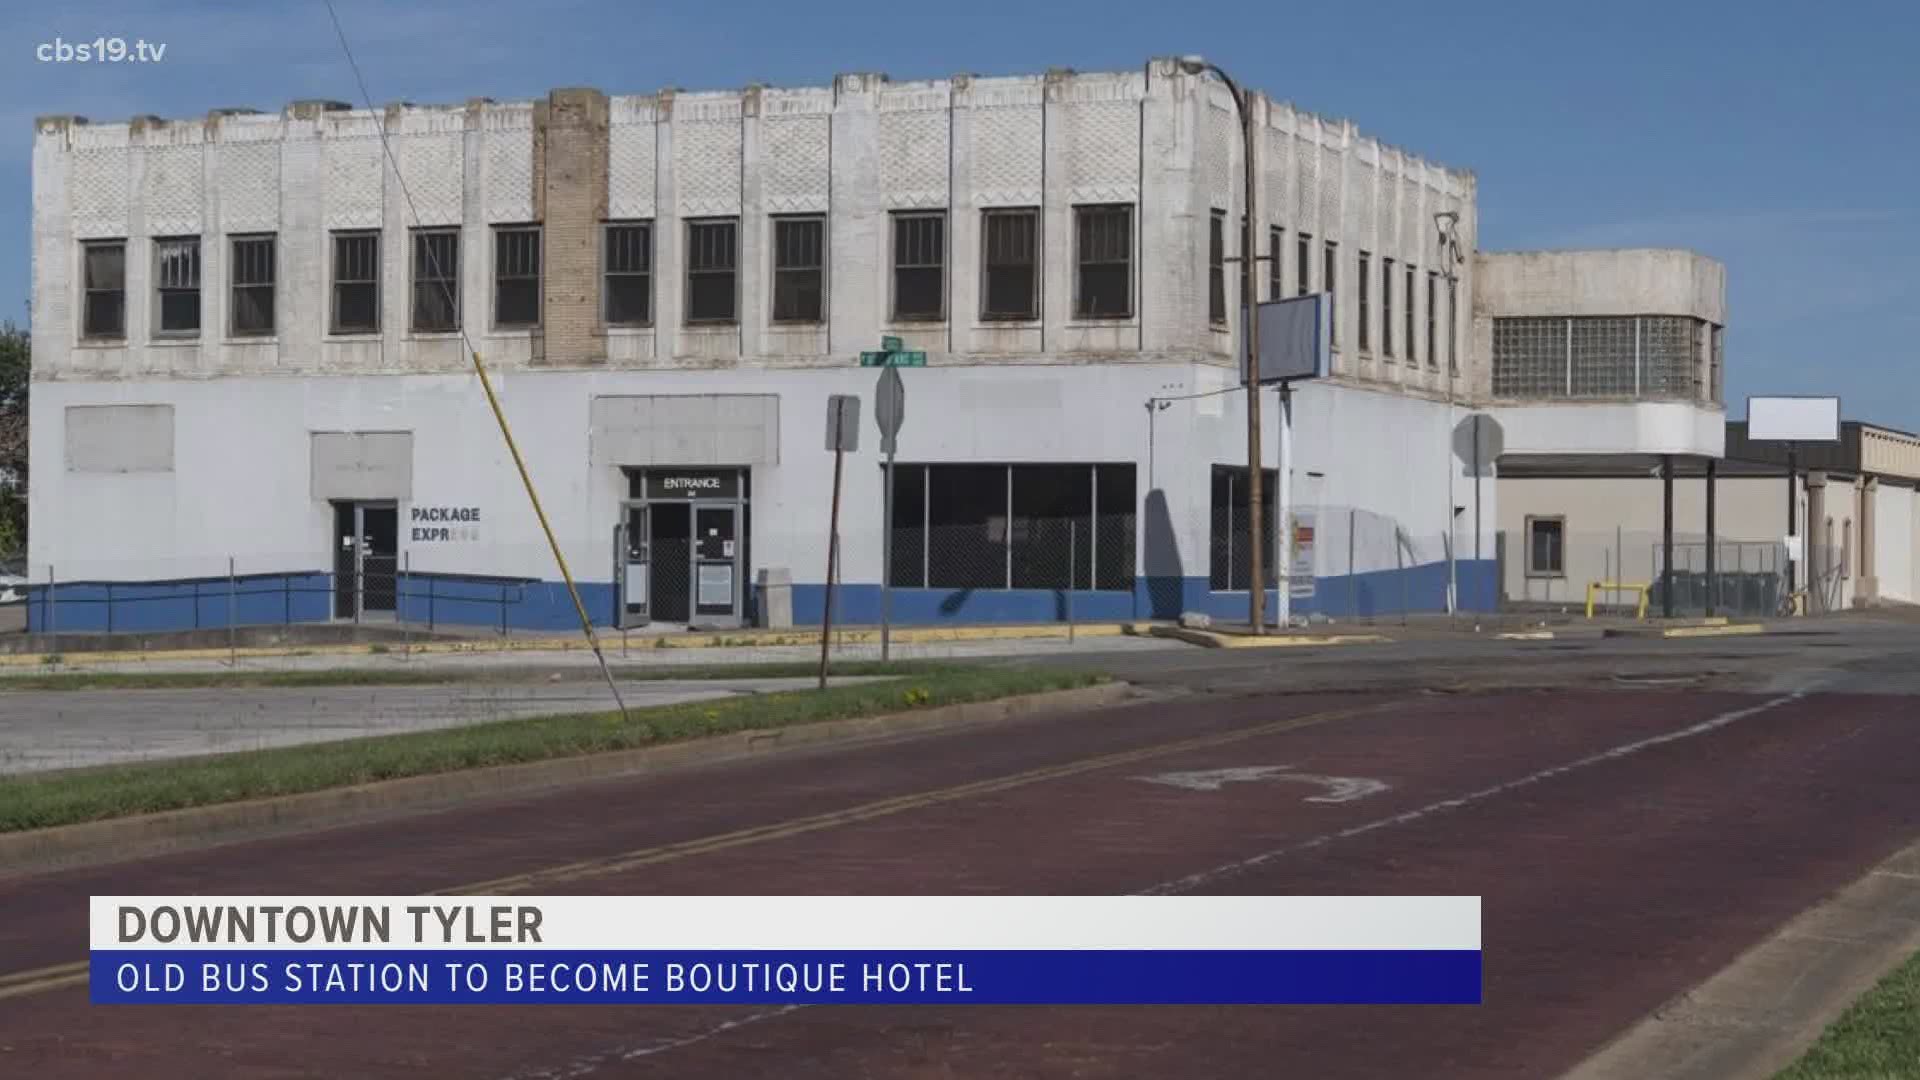 What was once a place for people to catch a bus will eventually become a place to rest and lounge in Downtown Tyler as a former bus station receives a revamp.